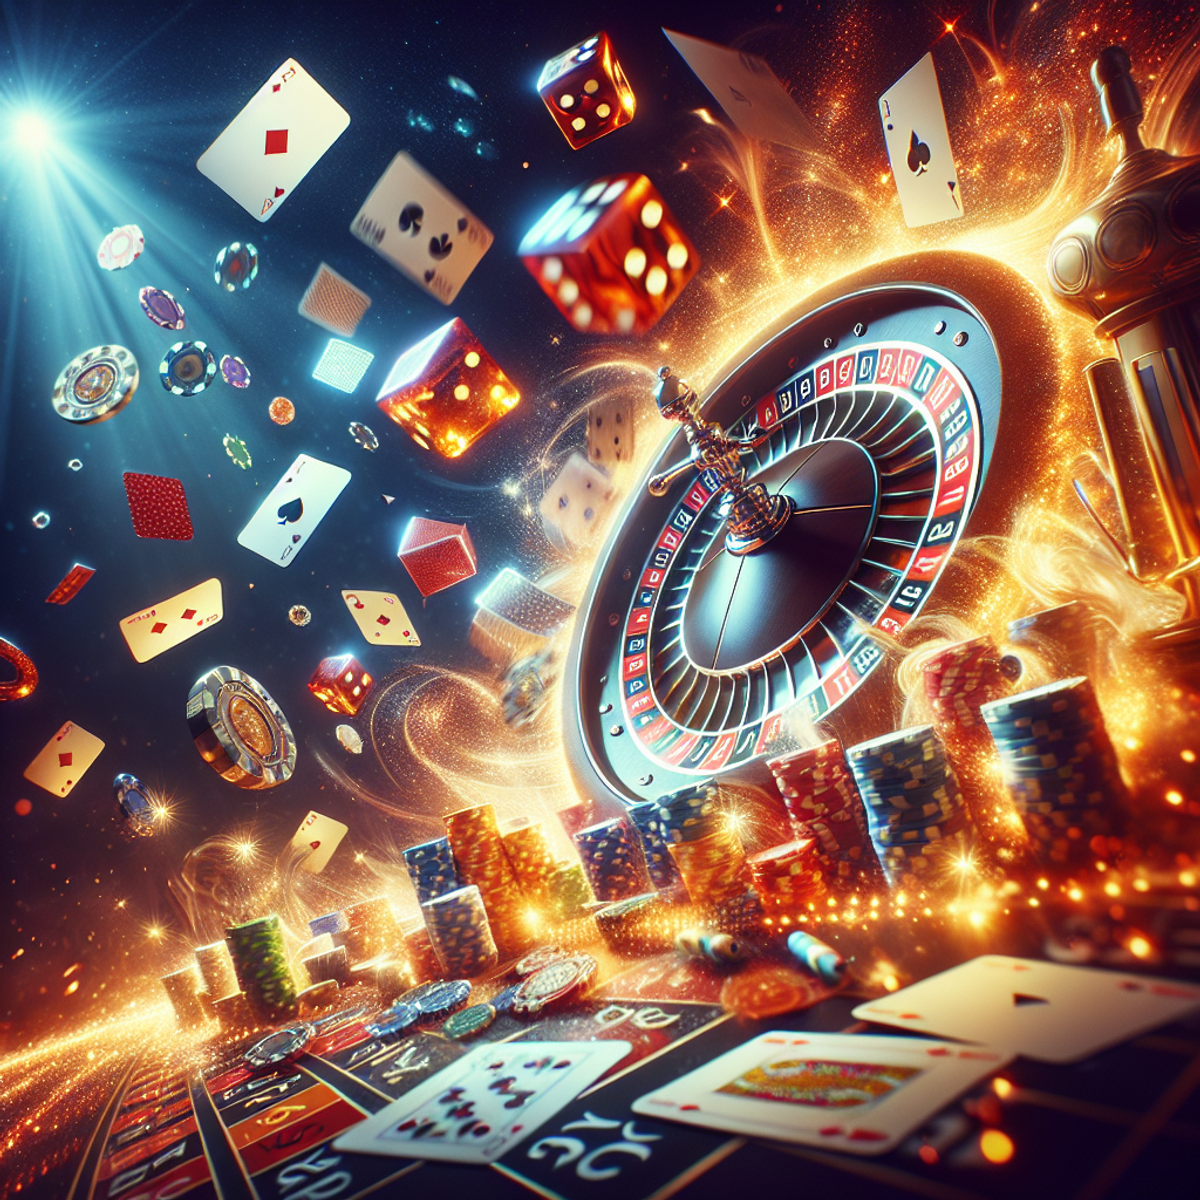 A vibrant image featuring playing cards, dice, and a spinning roulette wheel suspended in mid-air, surrounded by a rich, glamorous palette of colors.